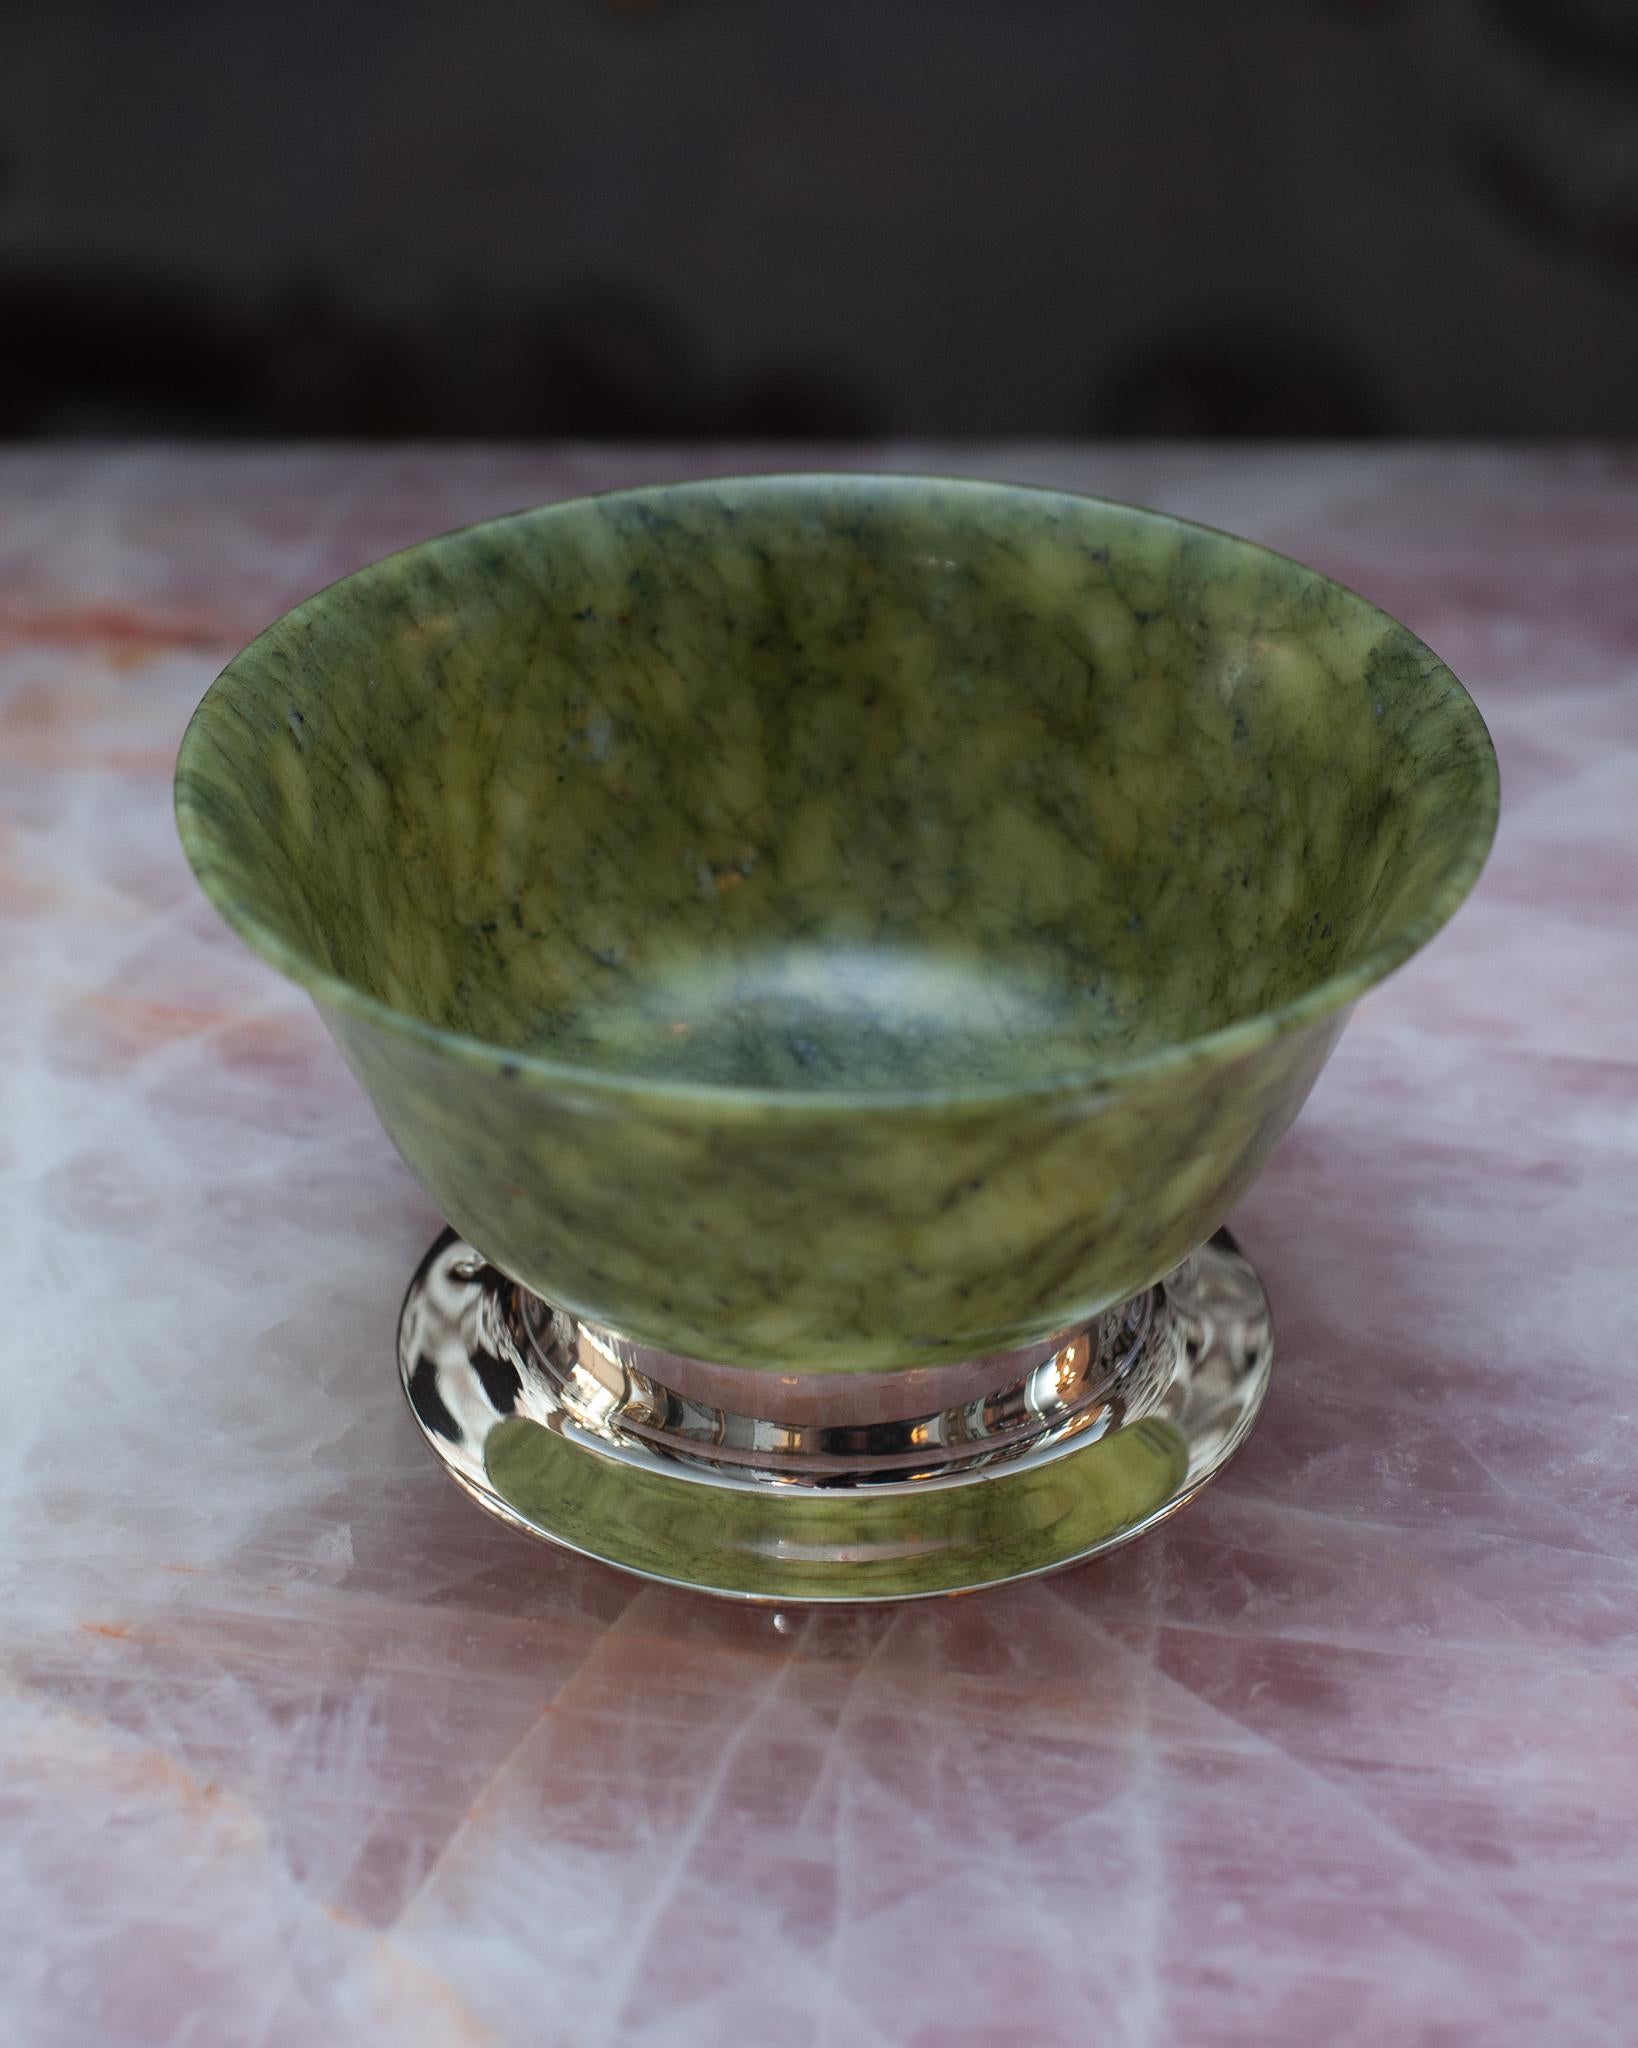 A stunning fine jade bowl on a handmade 925 sterling silver base. Expertly crafted by a master jeweller in Porto, Portugal.